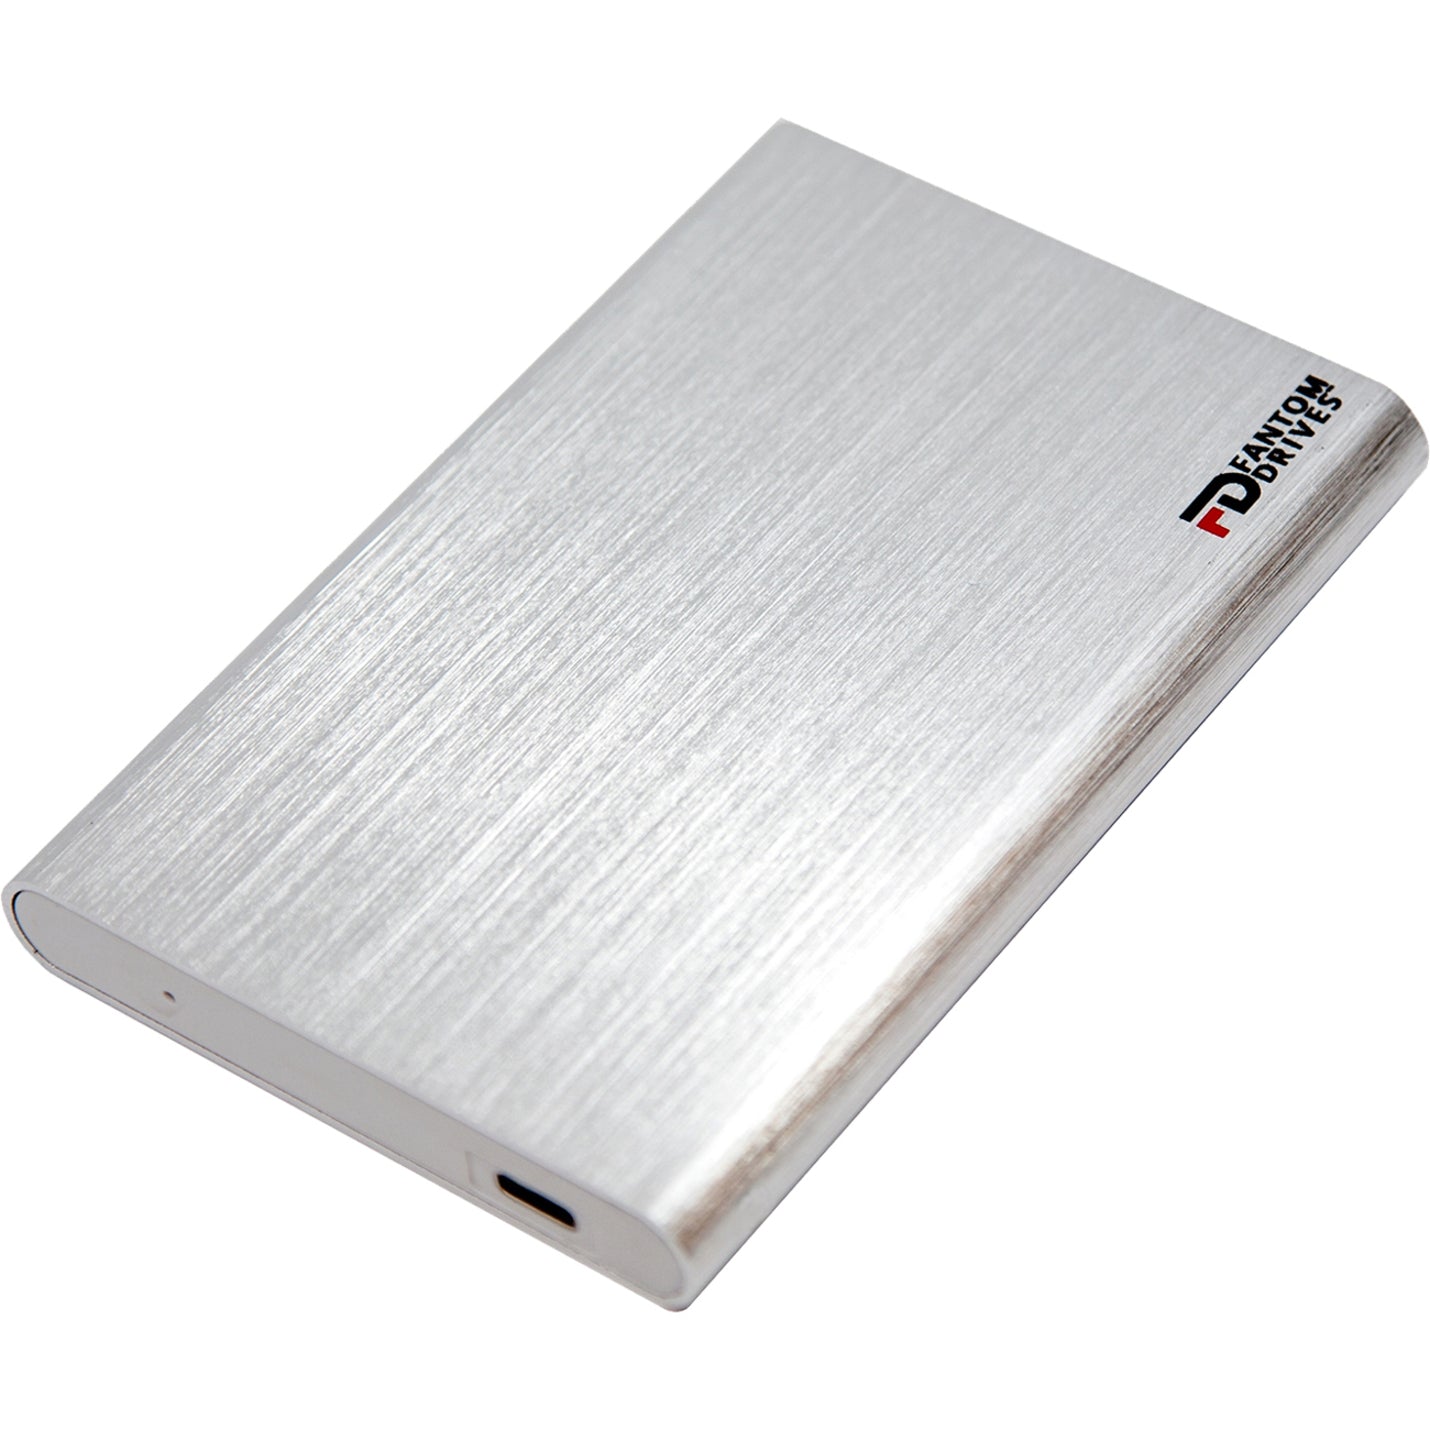 Fantom Drives FD GFORCE 3.1 - 480GB Portable SSD - USB 3.1 Gen 2 Type-C 10Gb/s - Silver - Win Plug and Play - Made with High Quality Aluminum - Transfer Speed up to 560MB/s - 3 Year Warranty - (CSD480S-W)